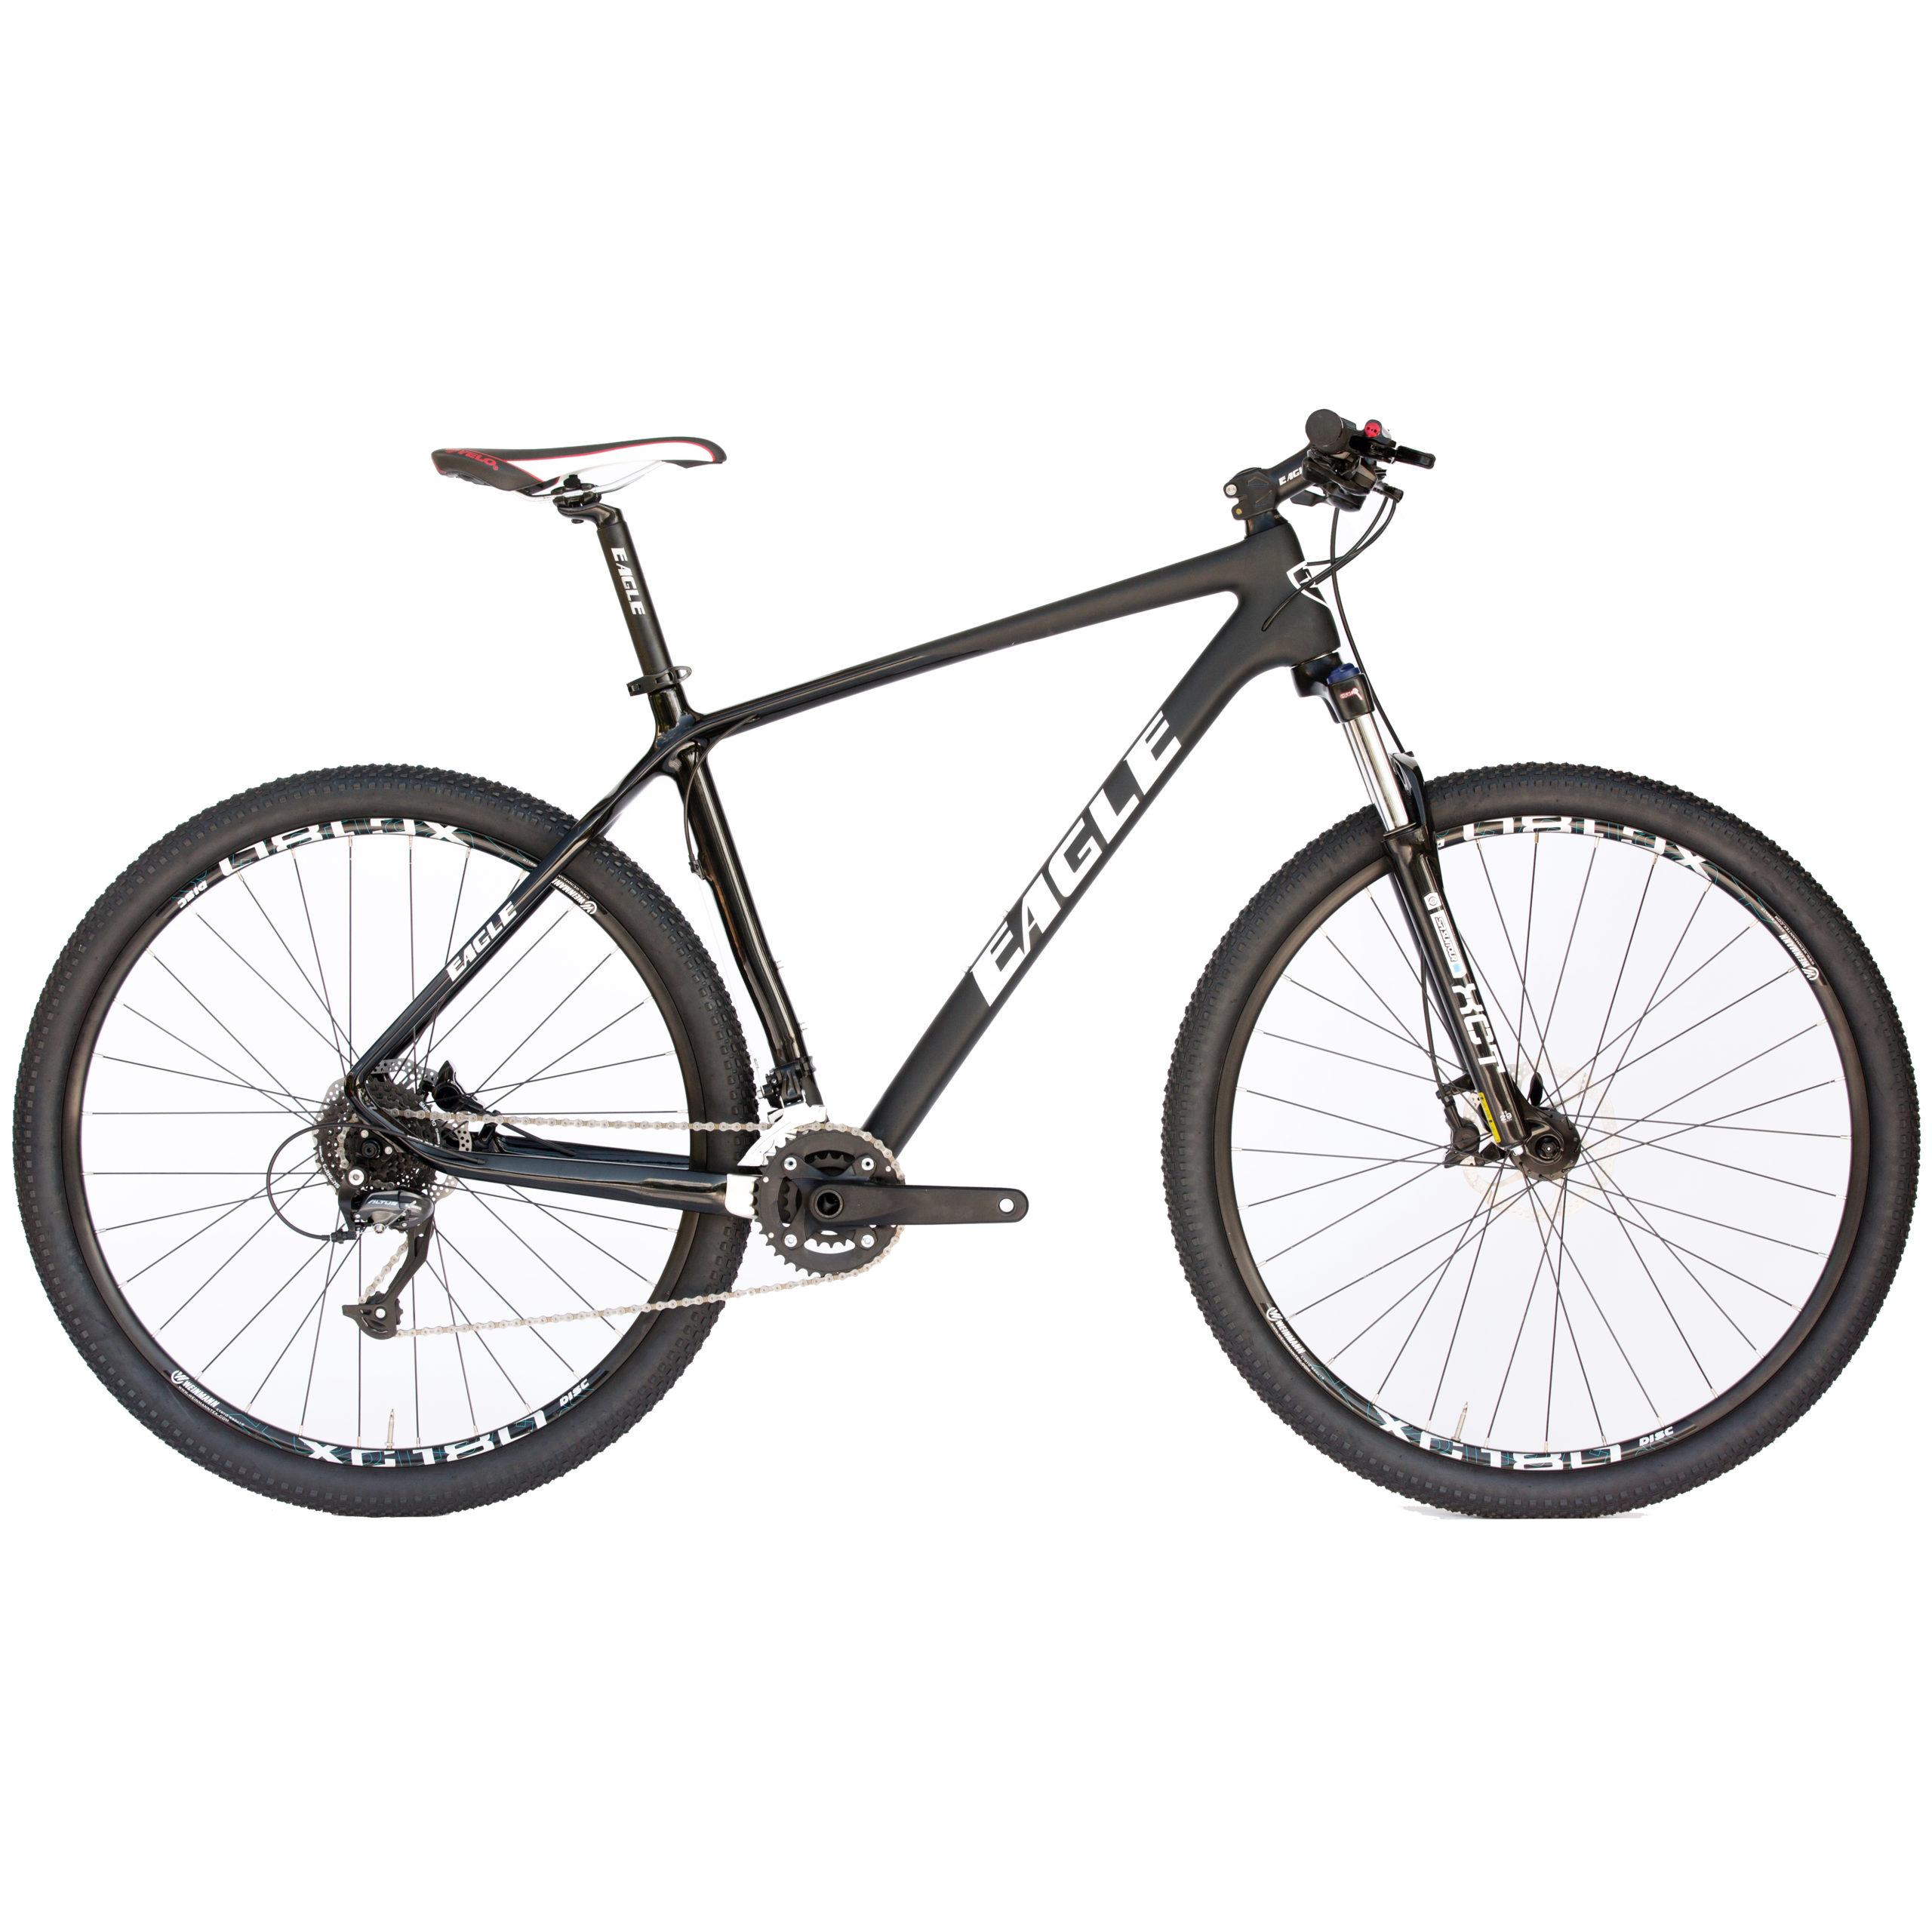 Carbon Fibre Mountain Bike Hotsell, 56% OFF | www.oldtriangle.com